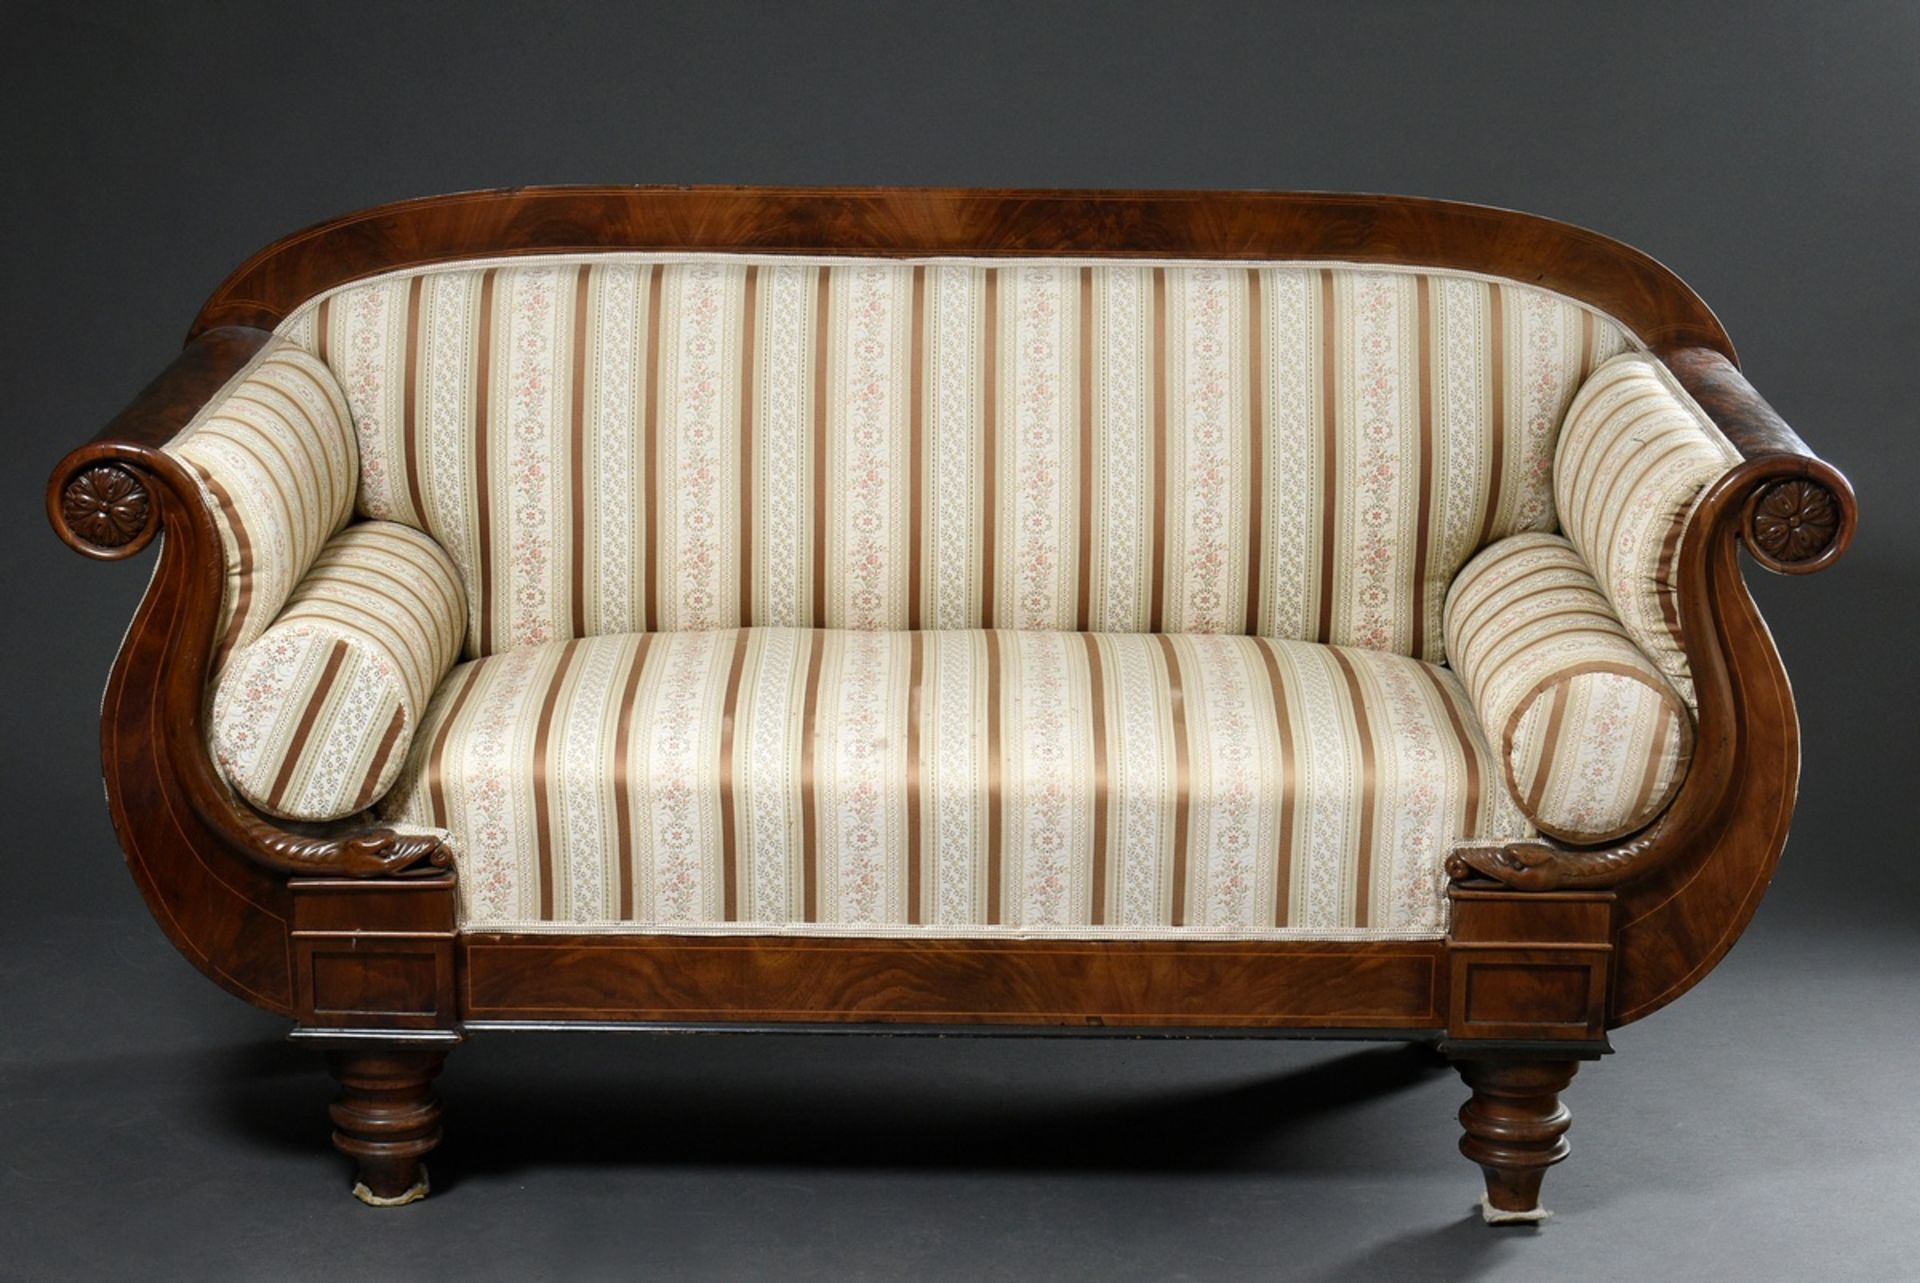 Small Biedermeier sofa with plastic snakes on the backrests, mahogany veneered on softwood with rib - Image 2 of 5